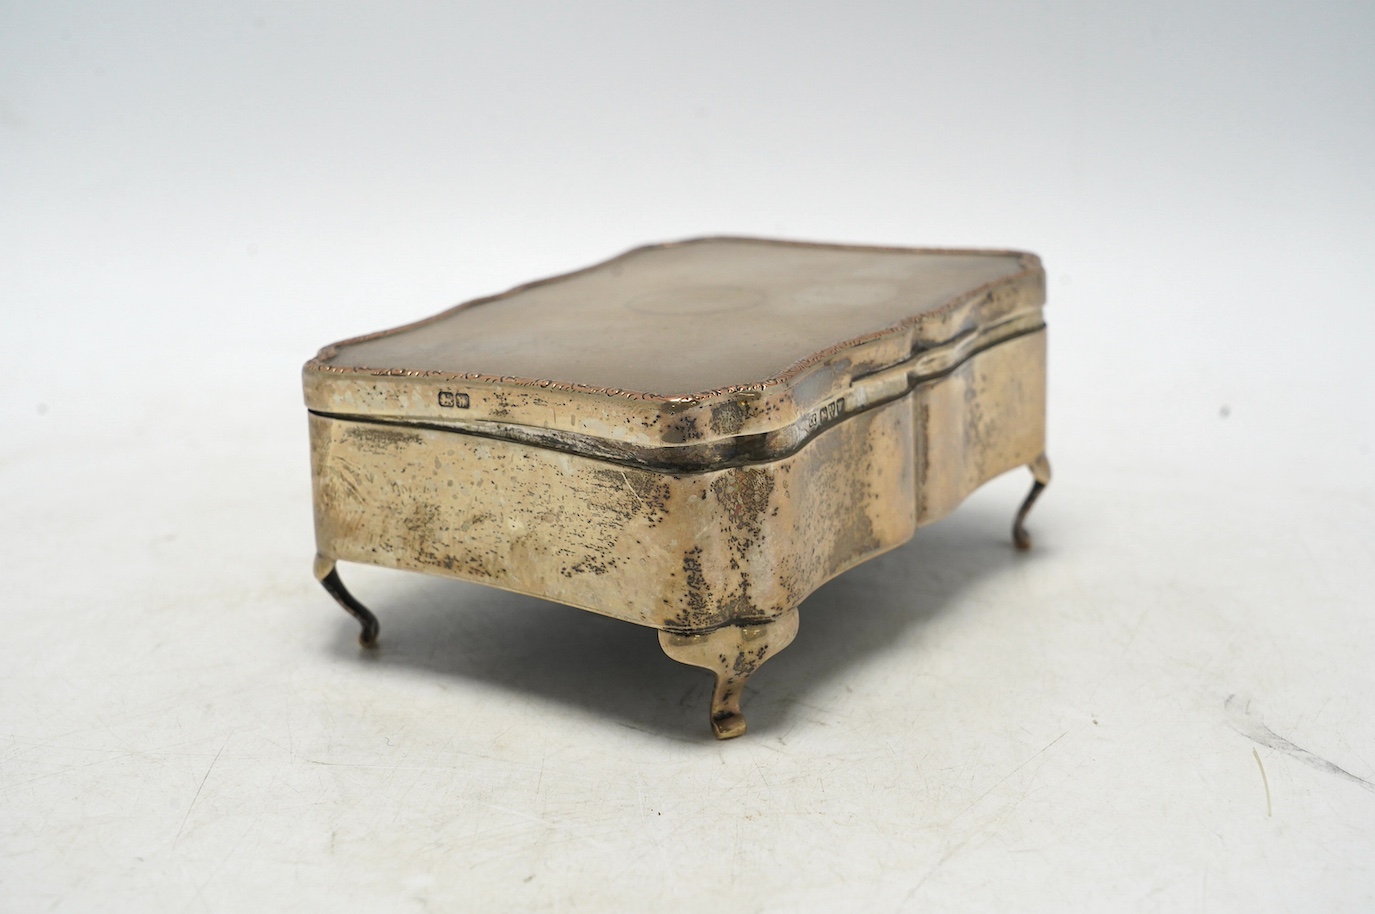 A George V silver mounted rectangular trinket box, by Colen Hewer Cheshire, Chester, 1922, 14cm. Condition - fair to poor